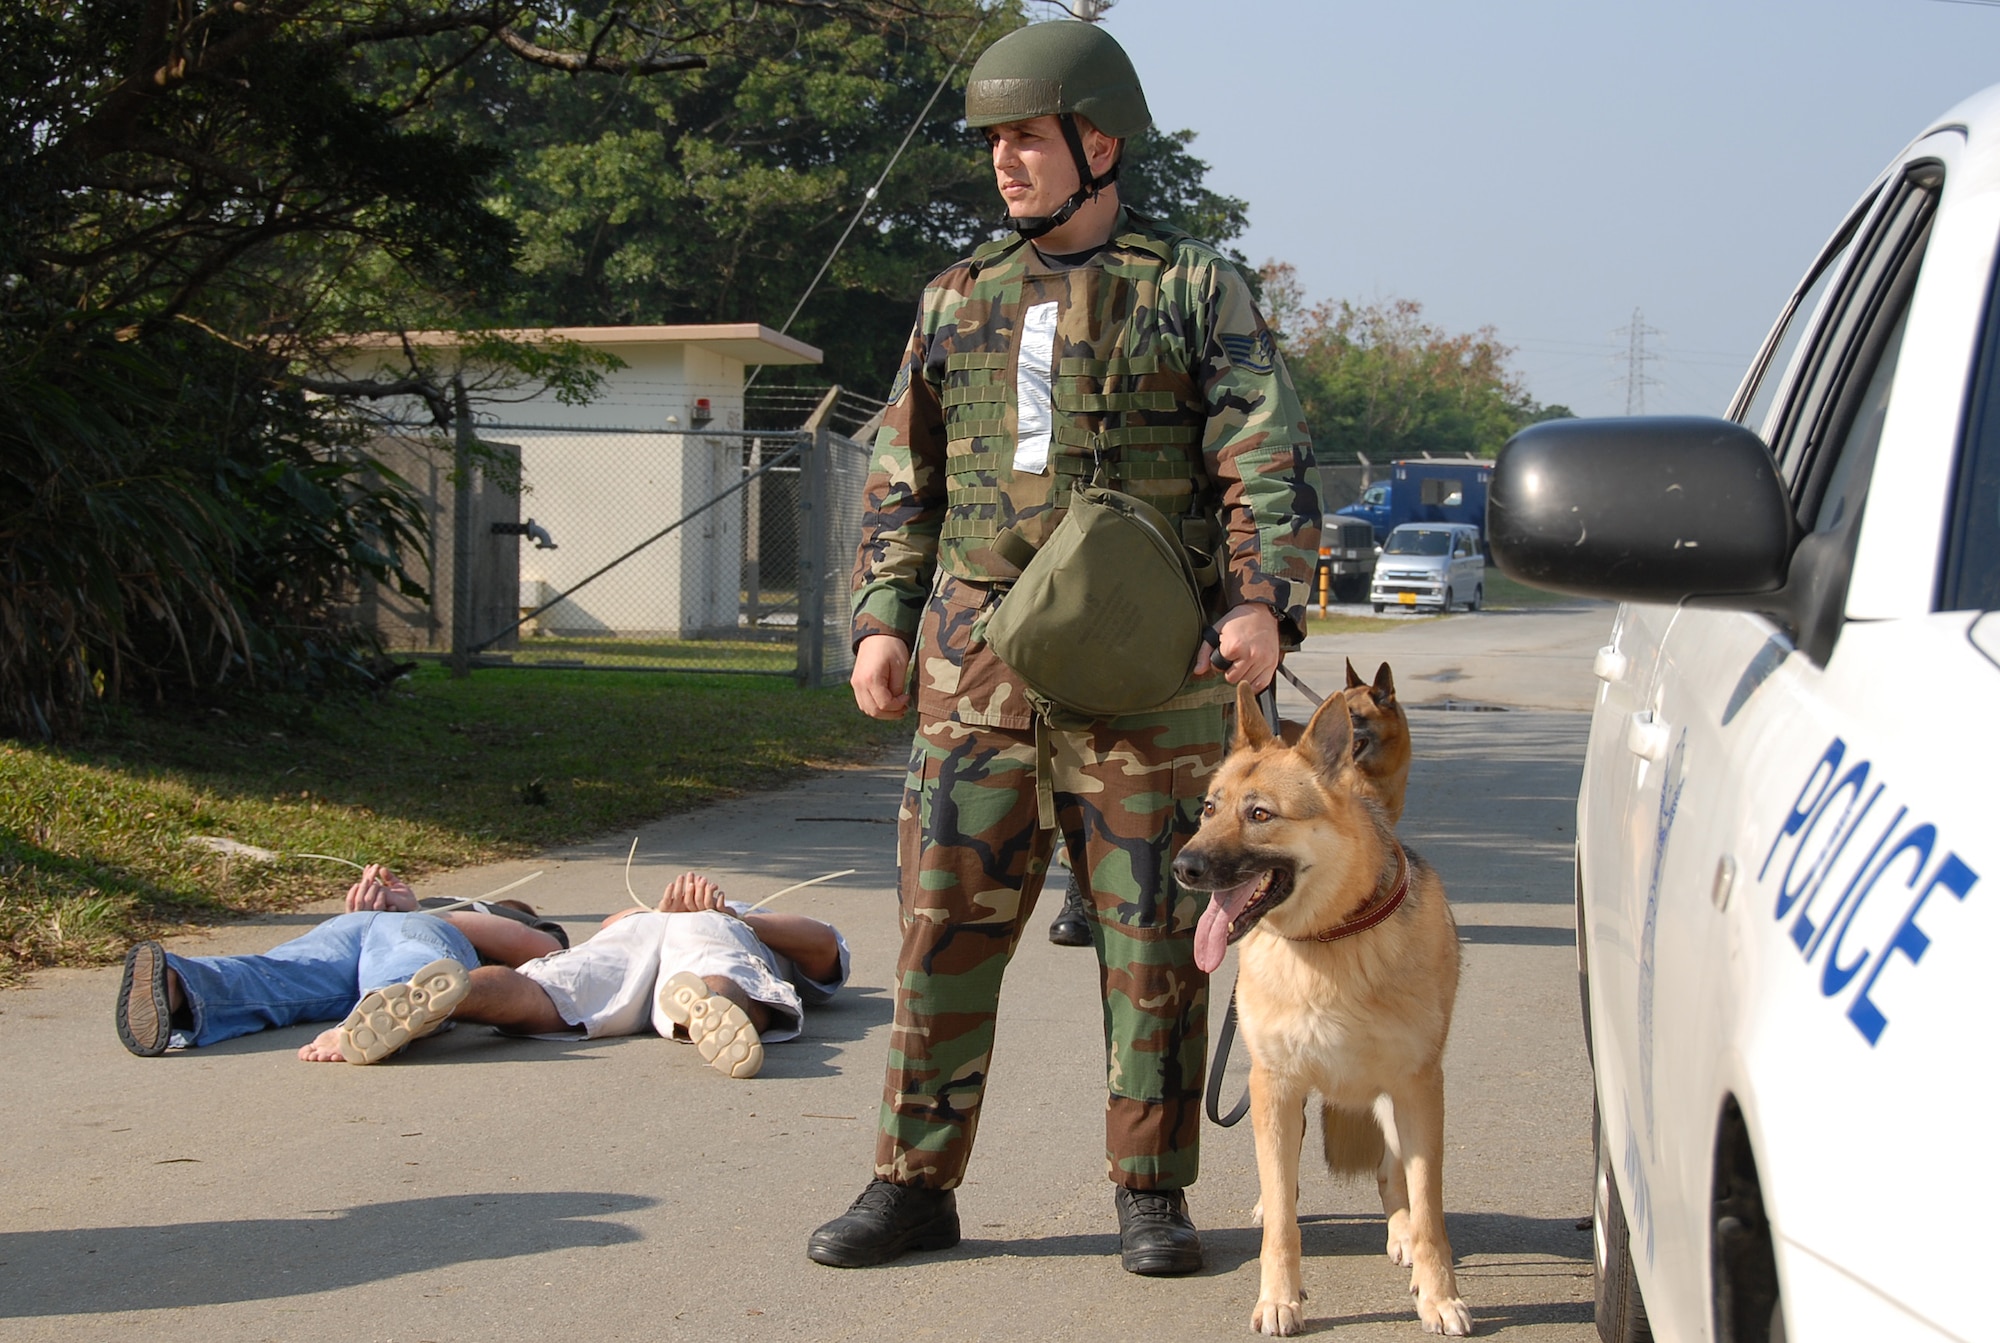 Staff Sgt. John Grice, 18th Security Forces Squadron dog handler, responds to a simulated protest with his canine during Local Operational Readiness Exercise Beverly High 08-3 at Kadena Air Base, Japan, Jan. 7, 2007. Chemical environment scenarios present unique challenges for Military Working Dogs. (U.S. Air Force photo/Tech Sgt. Anthony Iusi)